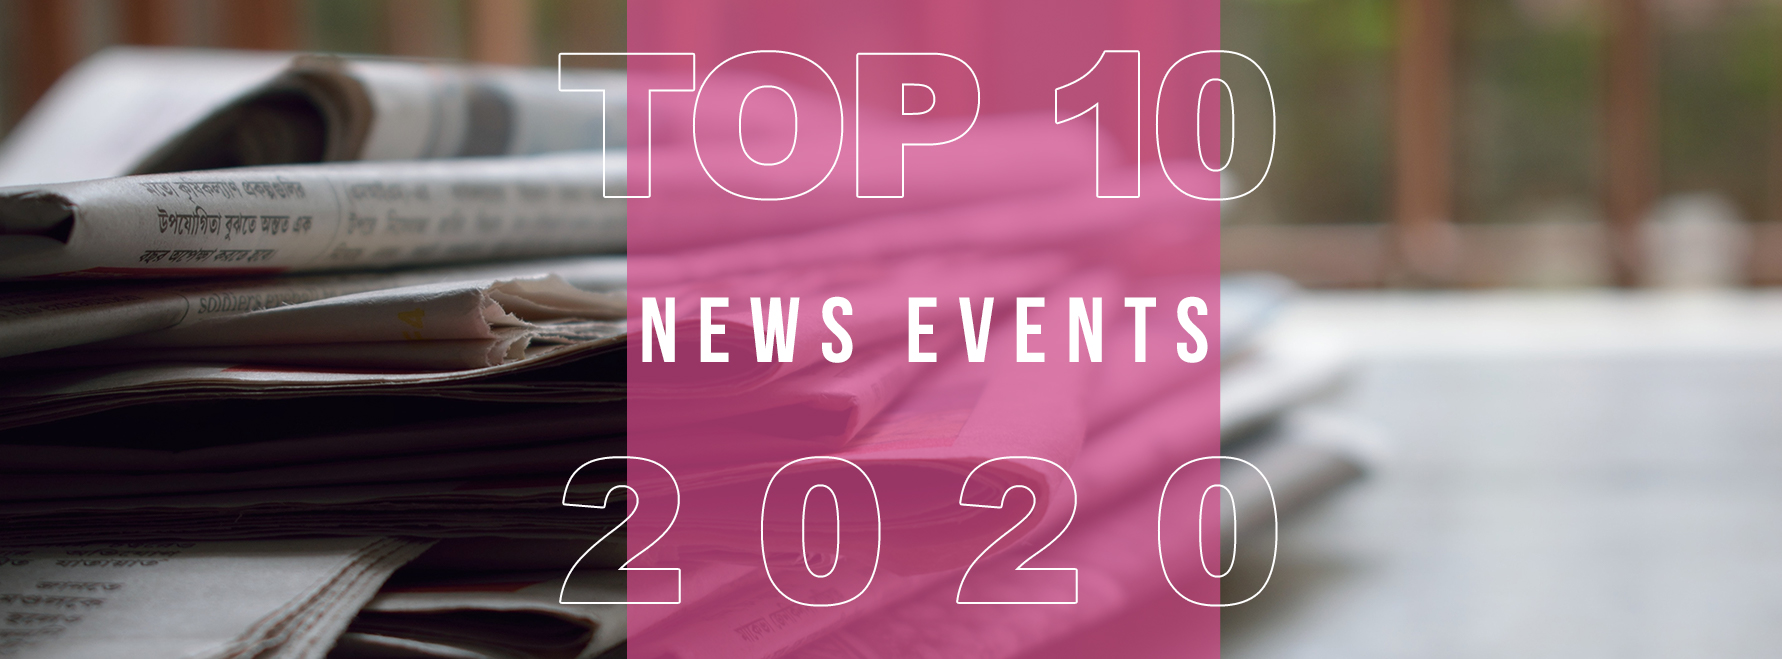 Top 10 News Events of 2020